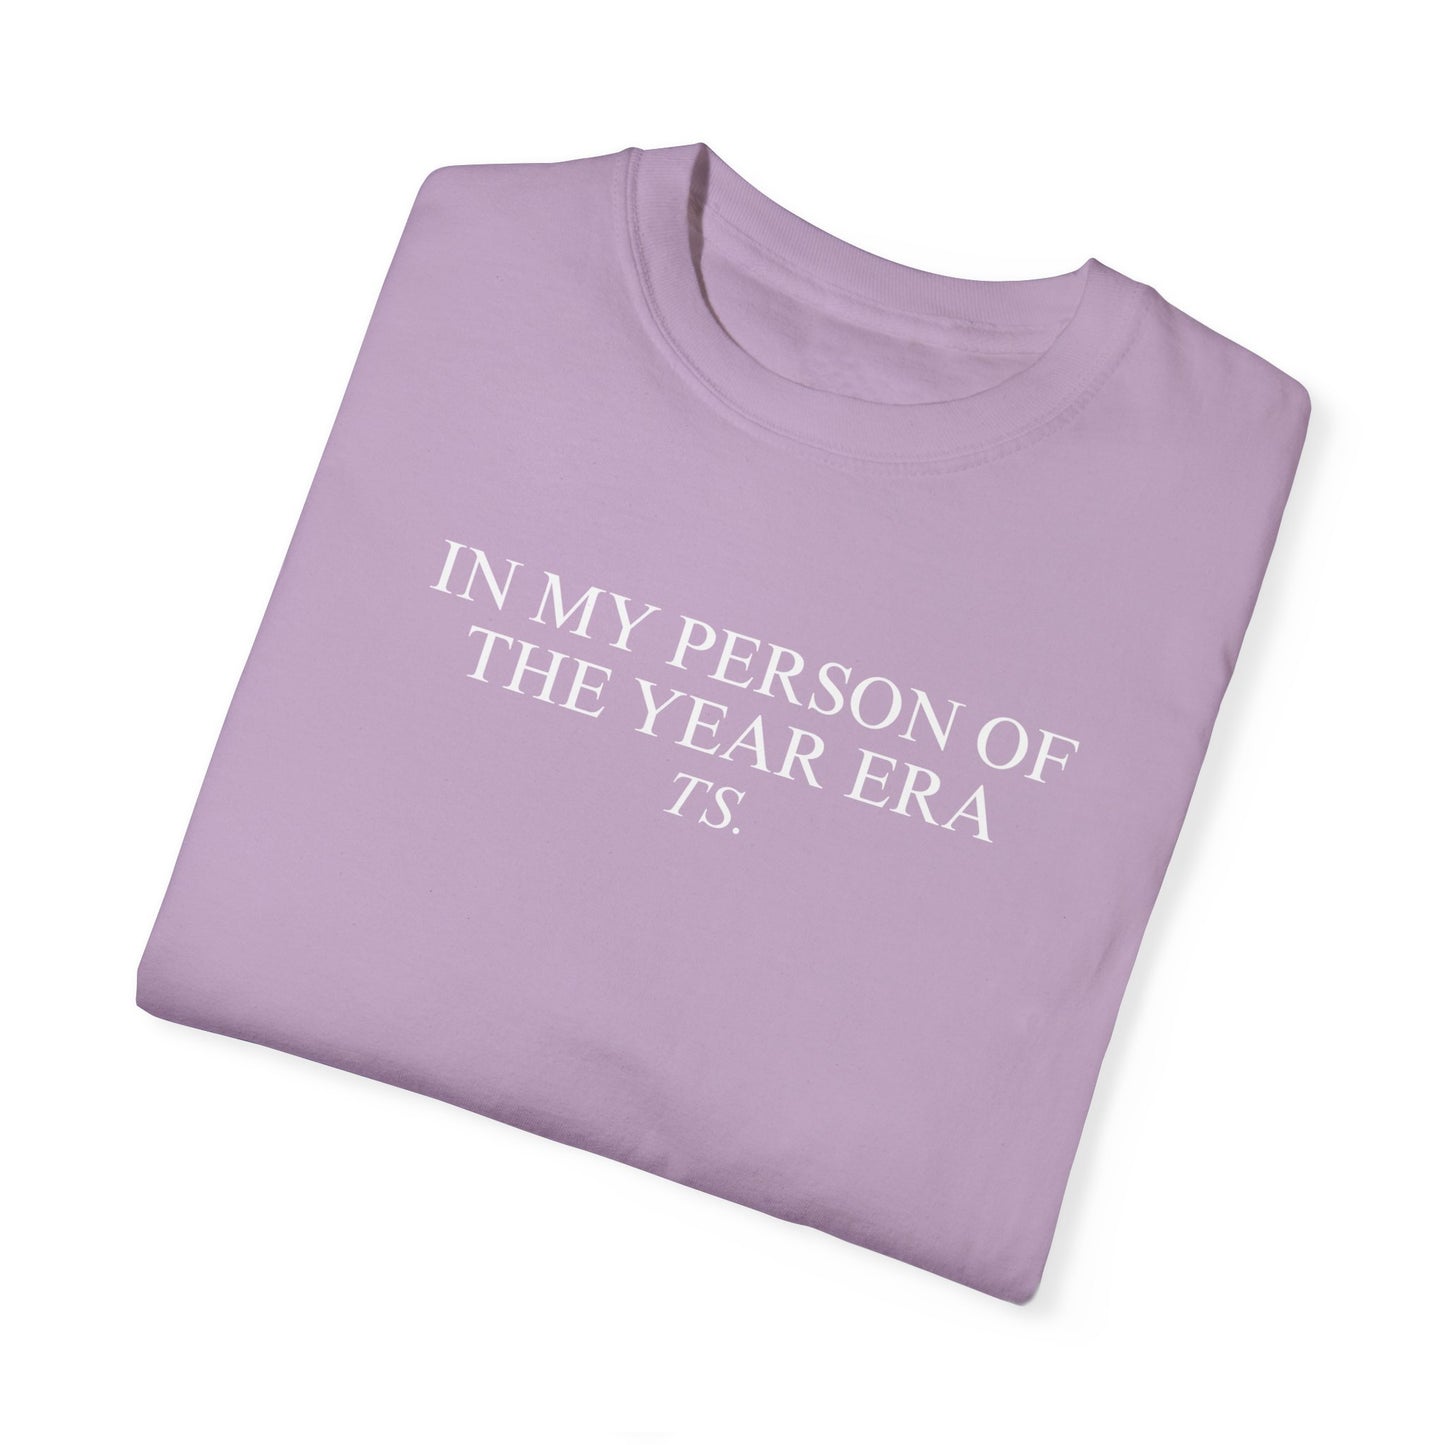 In My Person Of The Year Era Tee